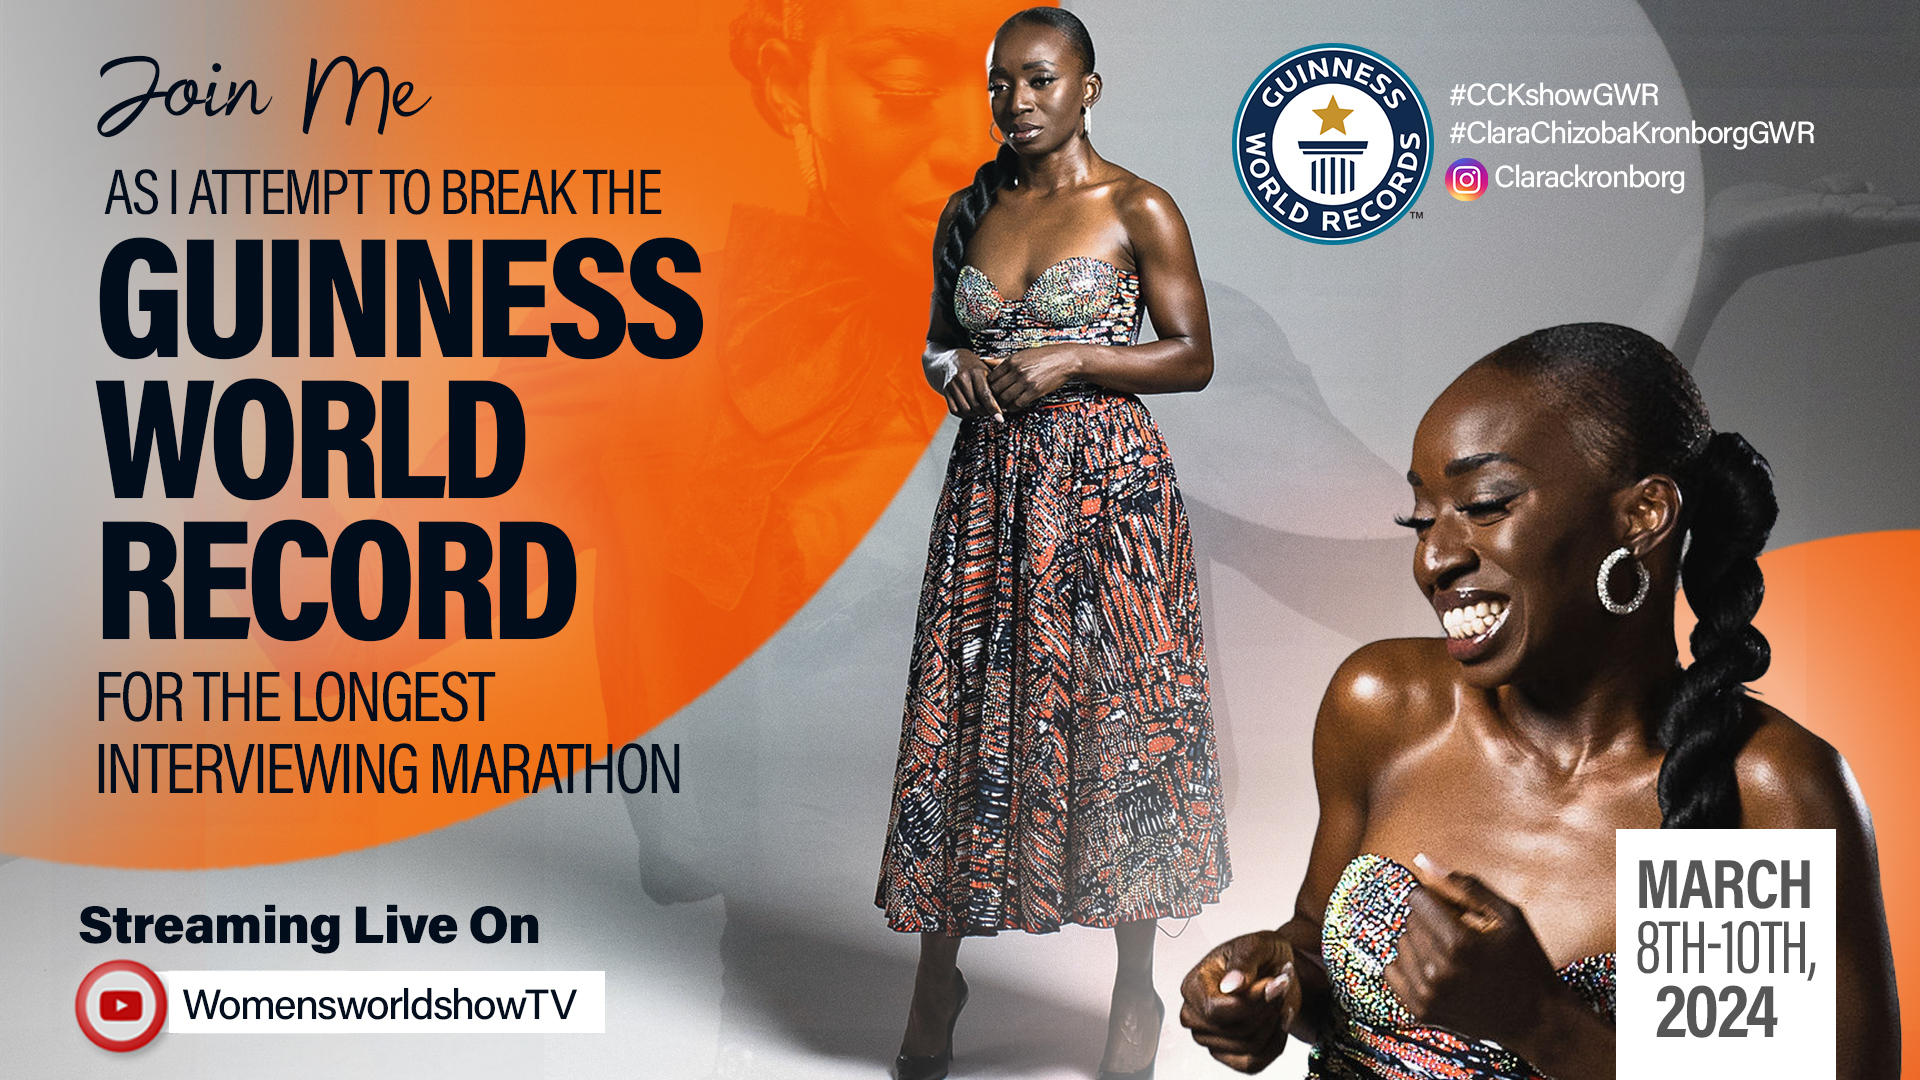 Clara Chizoba Kronborg succeeded in her attempt to break Guinness World Record for the  Longest Interviewing Marathon